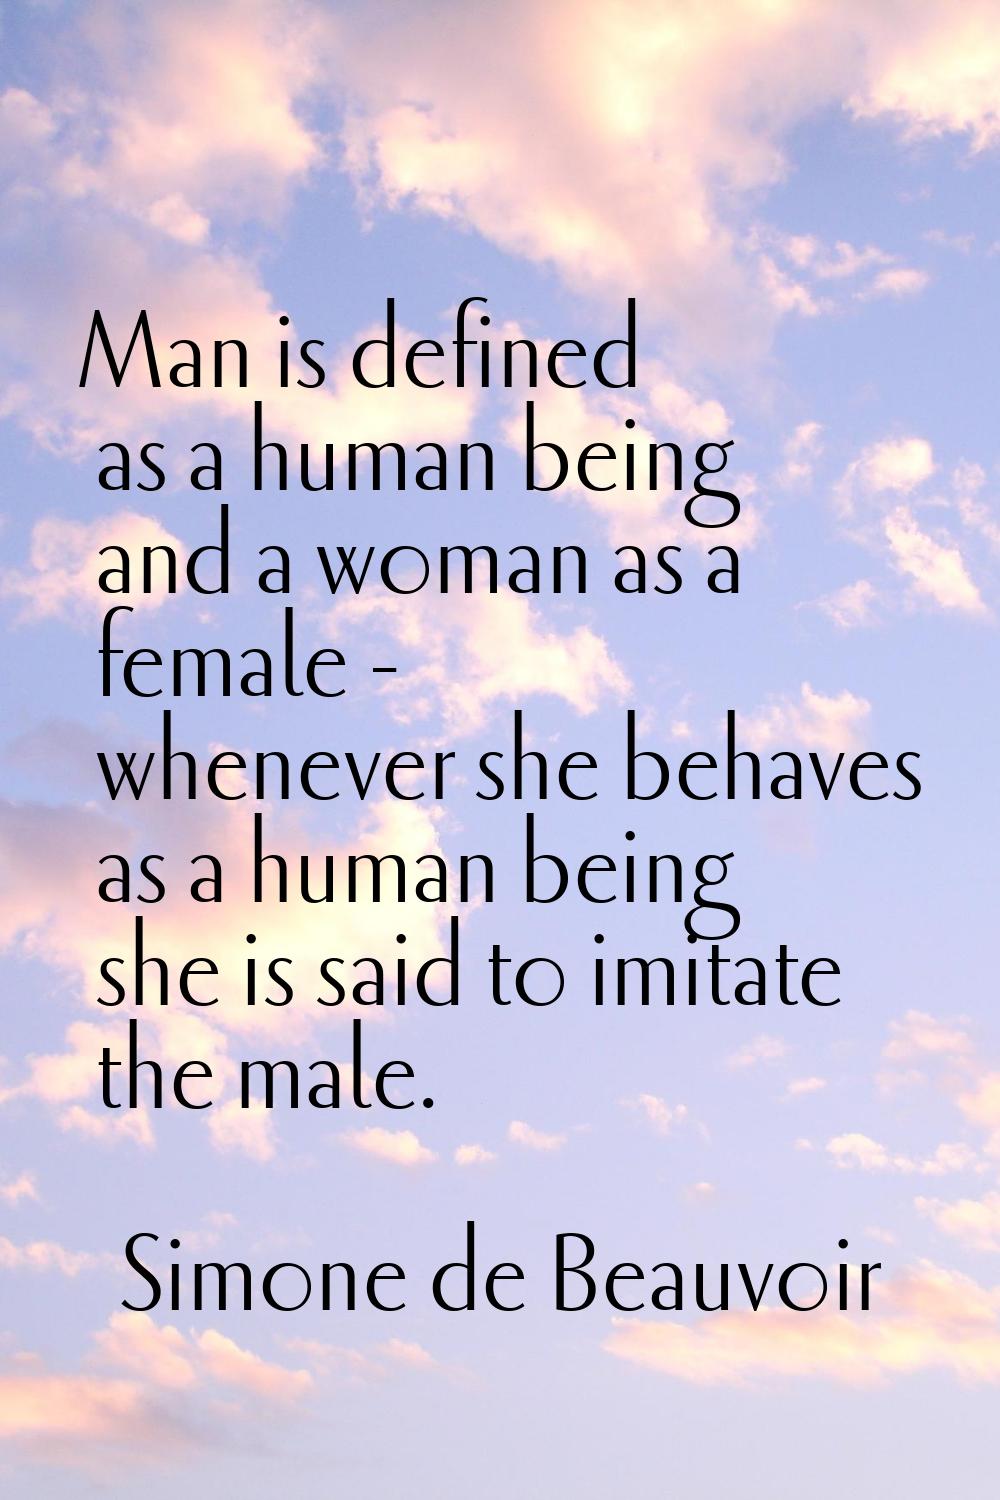 Man is defined as a human being and a woman as a female - whenever she behaves as a human being she